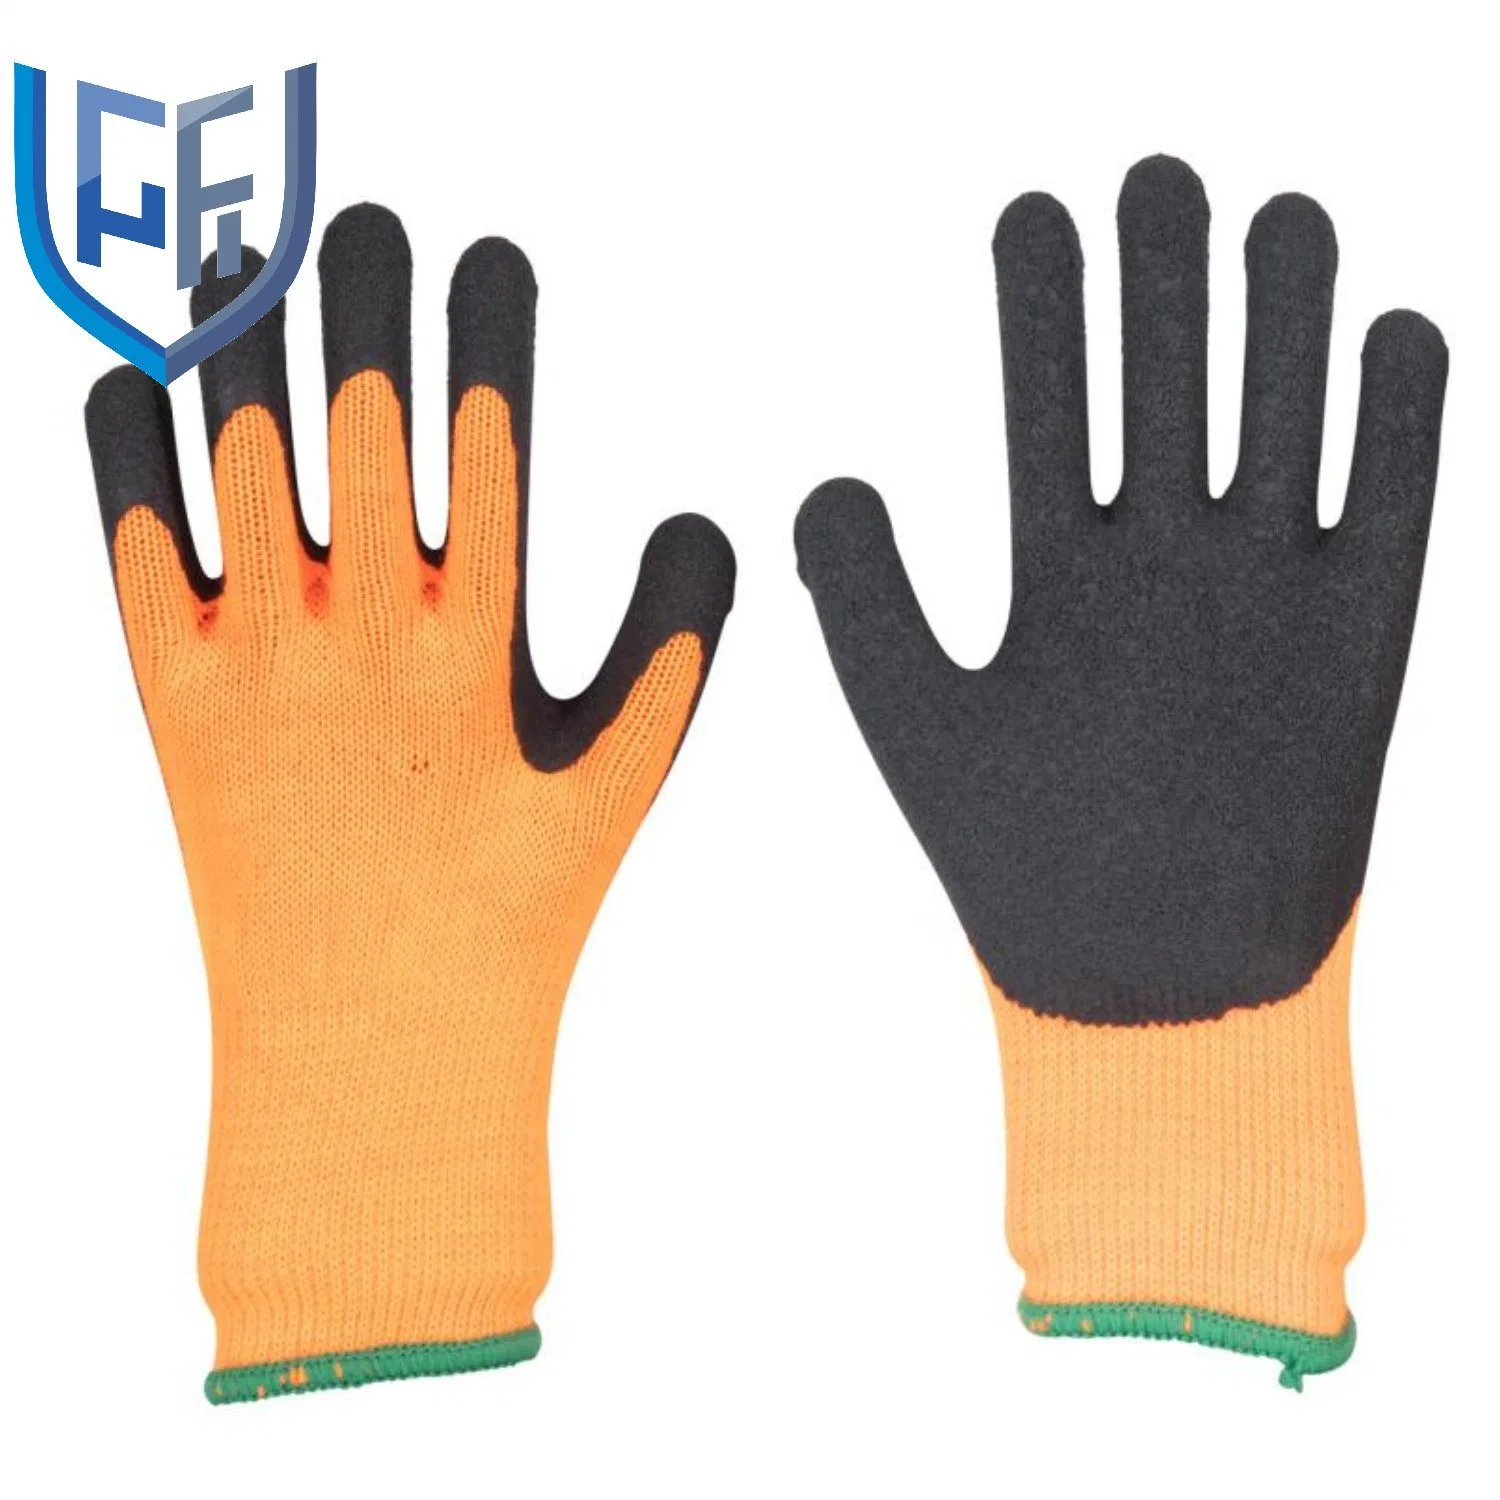 Wholesale Wholesale 10g Knitted Winter Acrylic Warm Useful Knit Work with Latex Foam Palm Gloves with Latex Coating